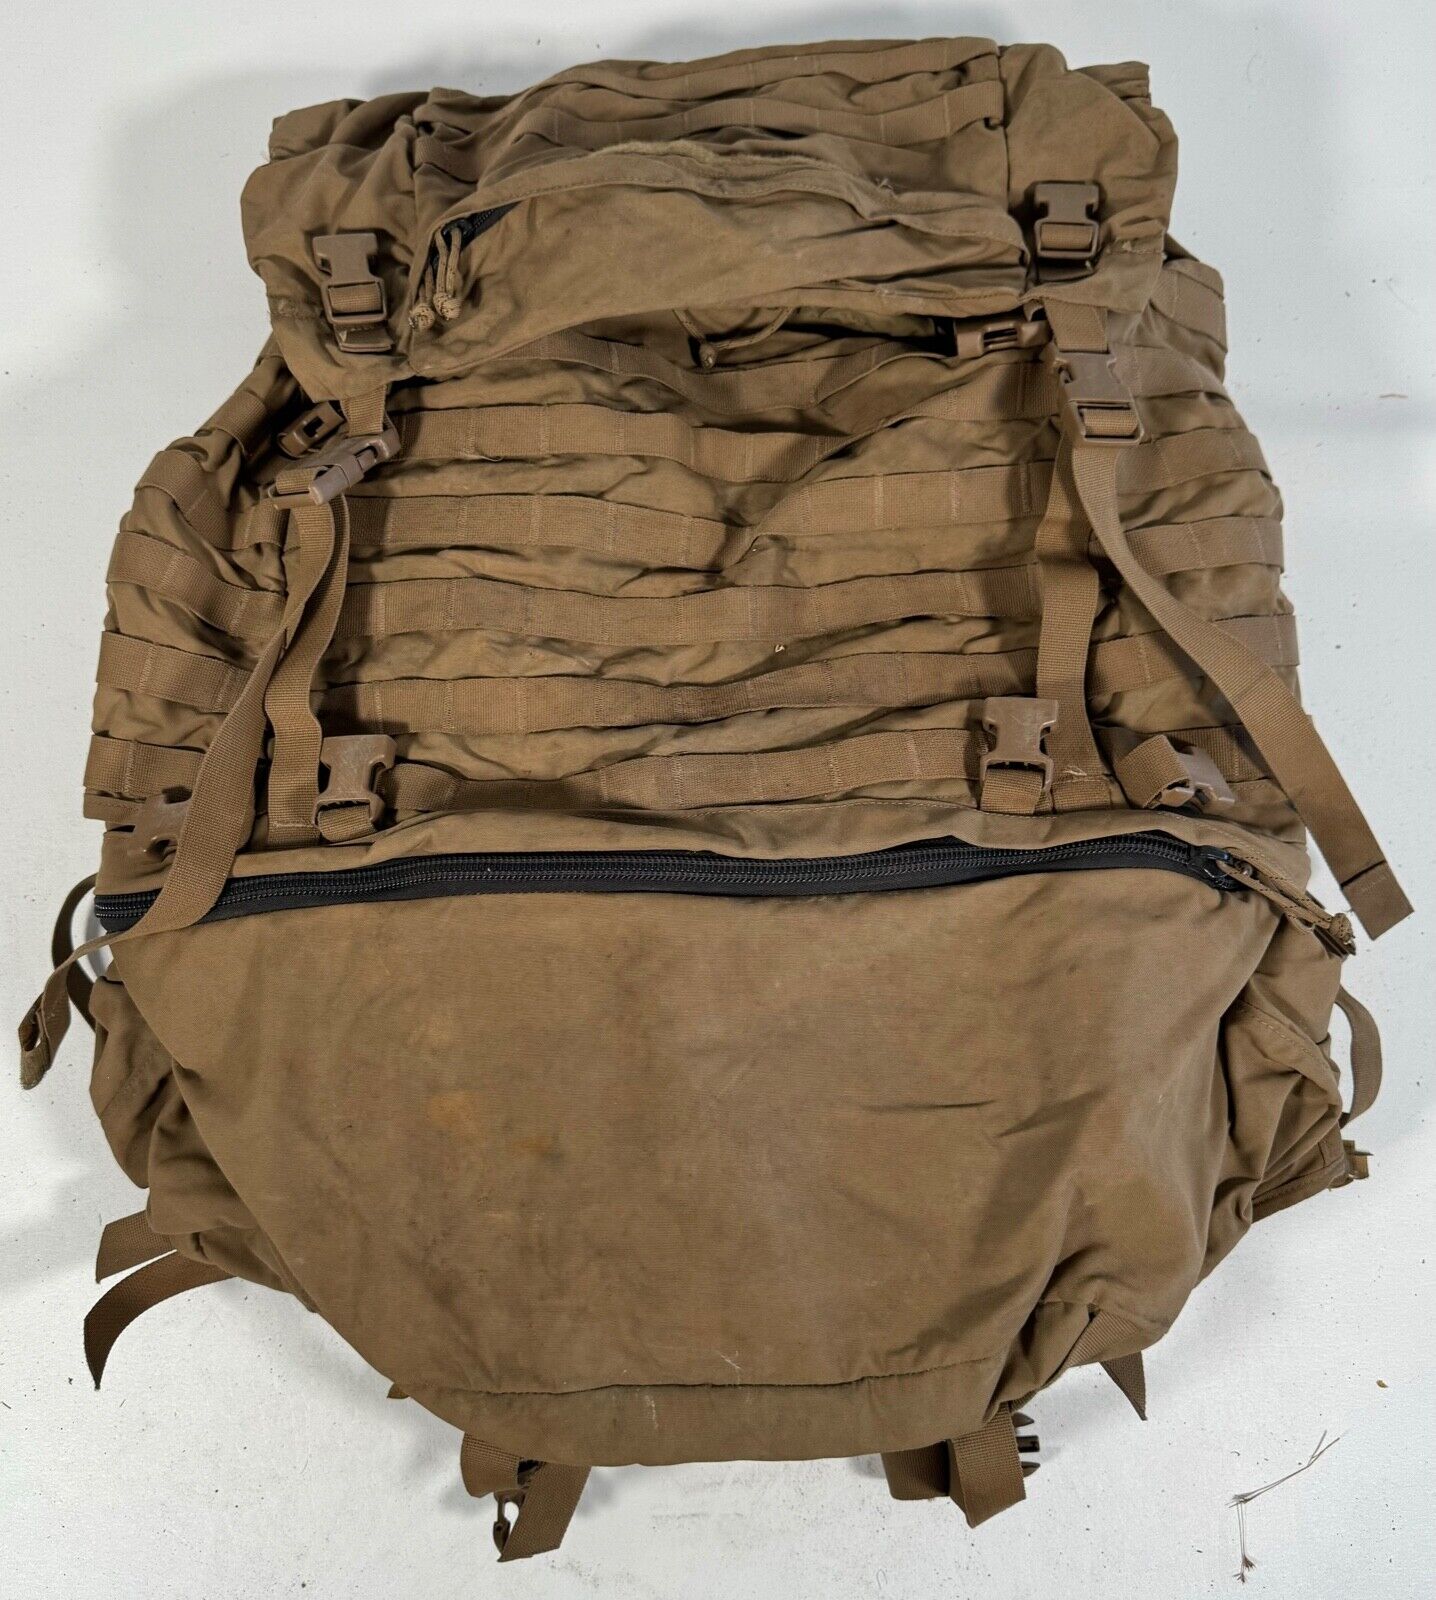 USMC Marine Corps FILBE Main Pack Backpack Rucksack Complete Coyote Brown